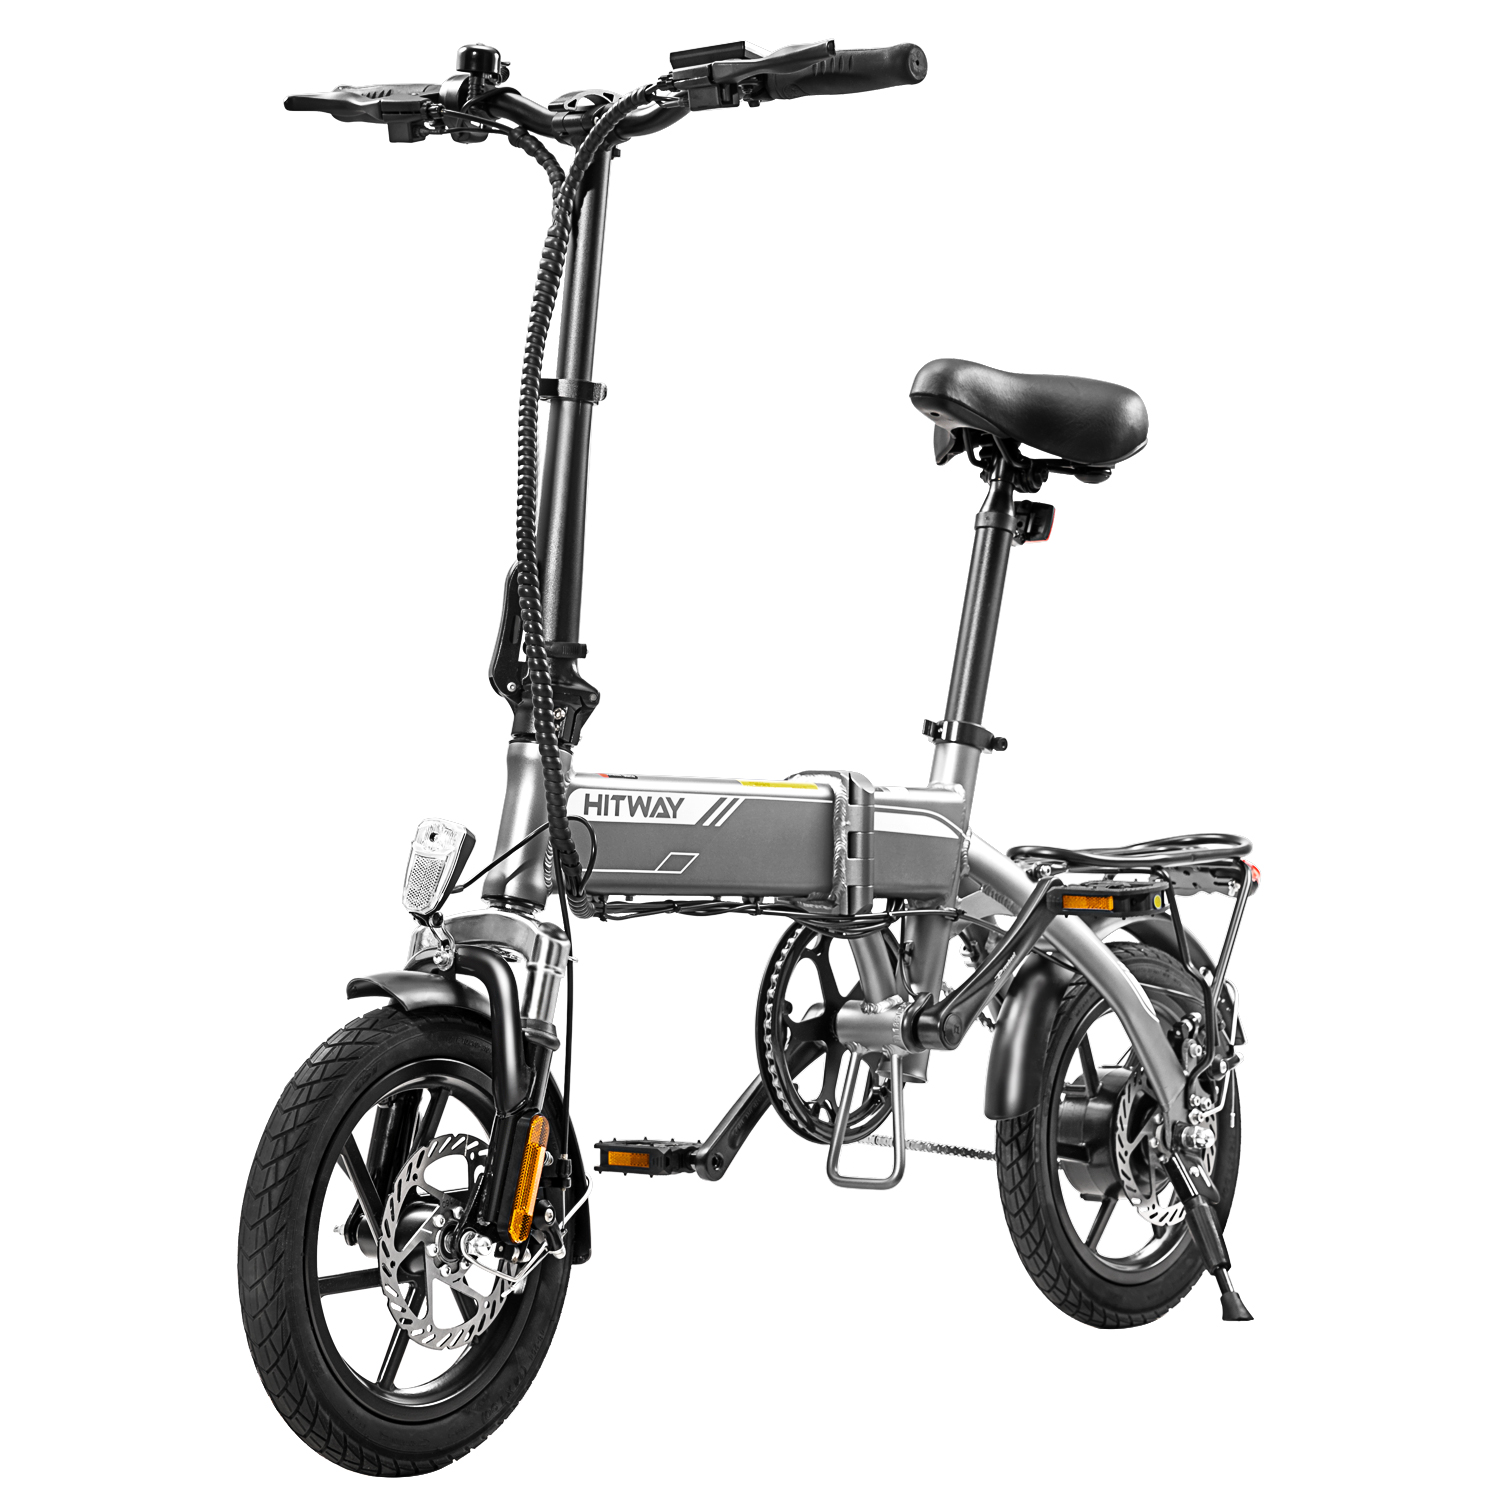 Warehouse In Europe 36V 7.5Ah Battery 350W Motor Folding Electric Bike 12 Inches Tyres Bicycle Adult Ebike Aluminum Alloy Frame 